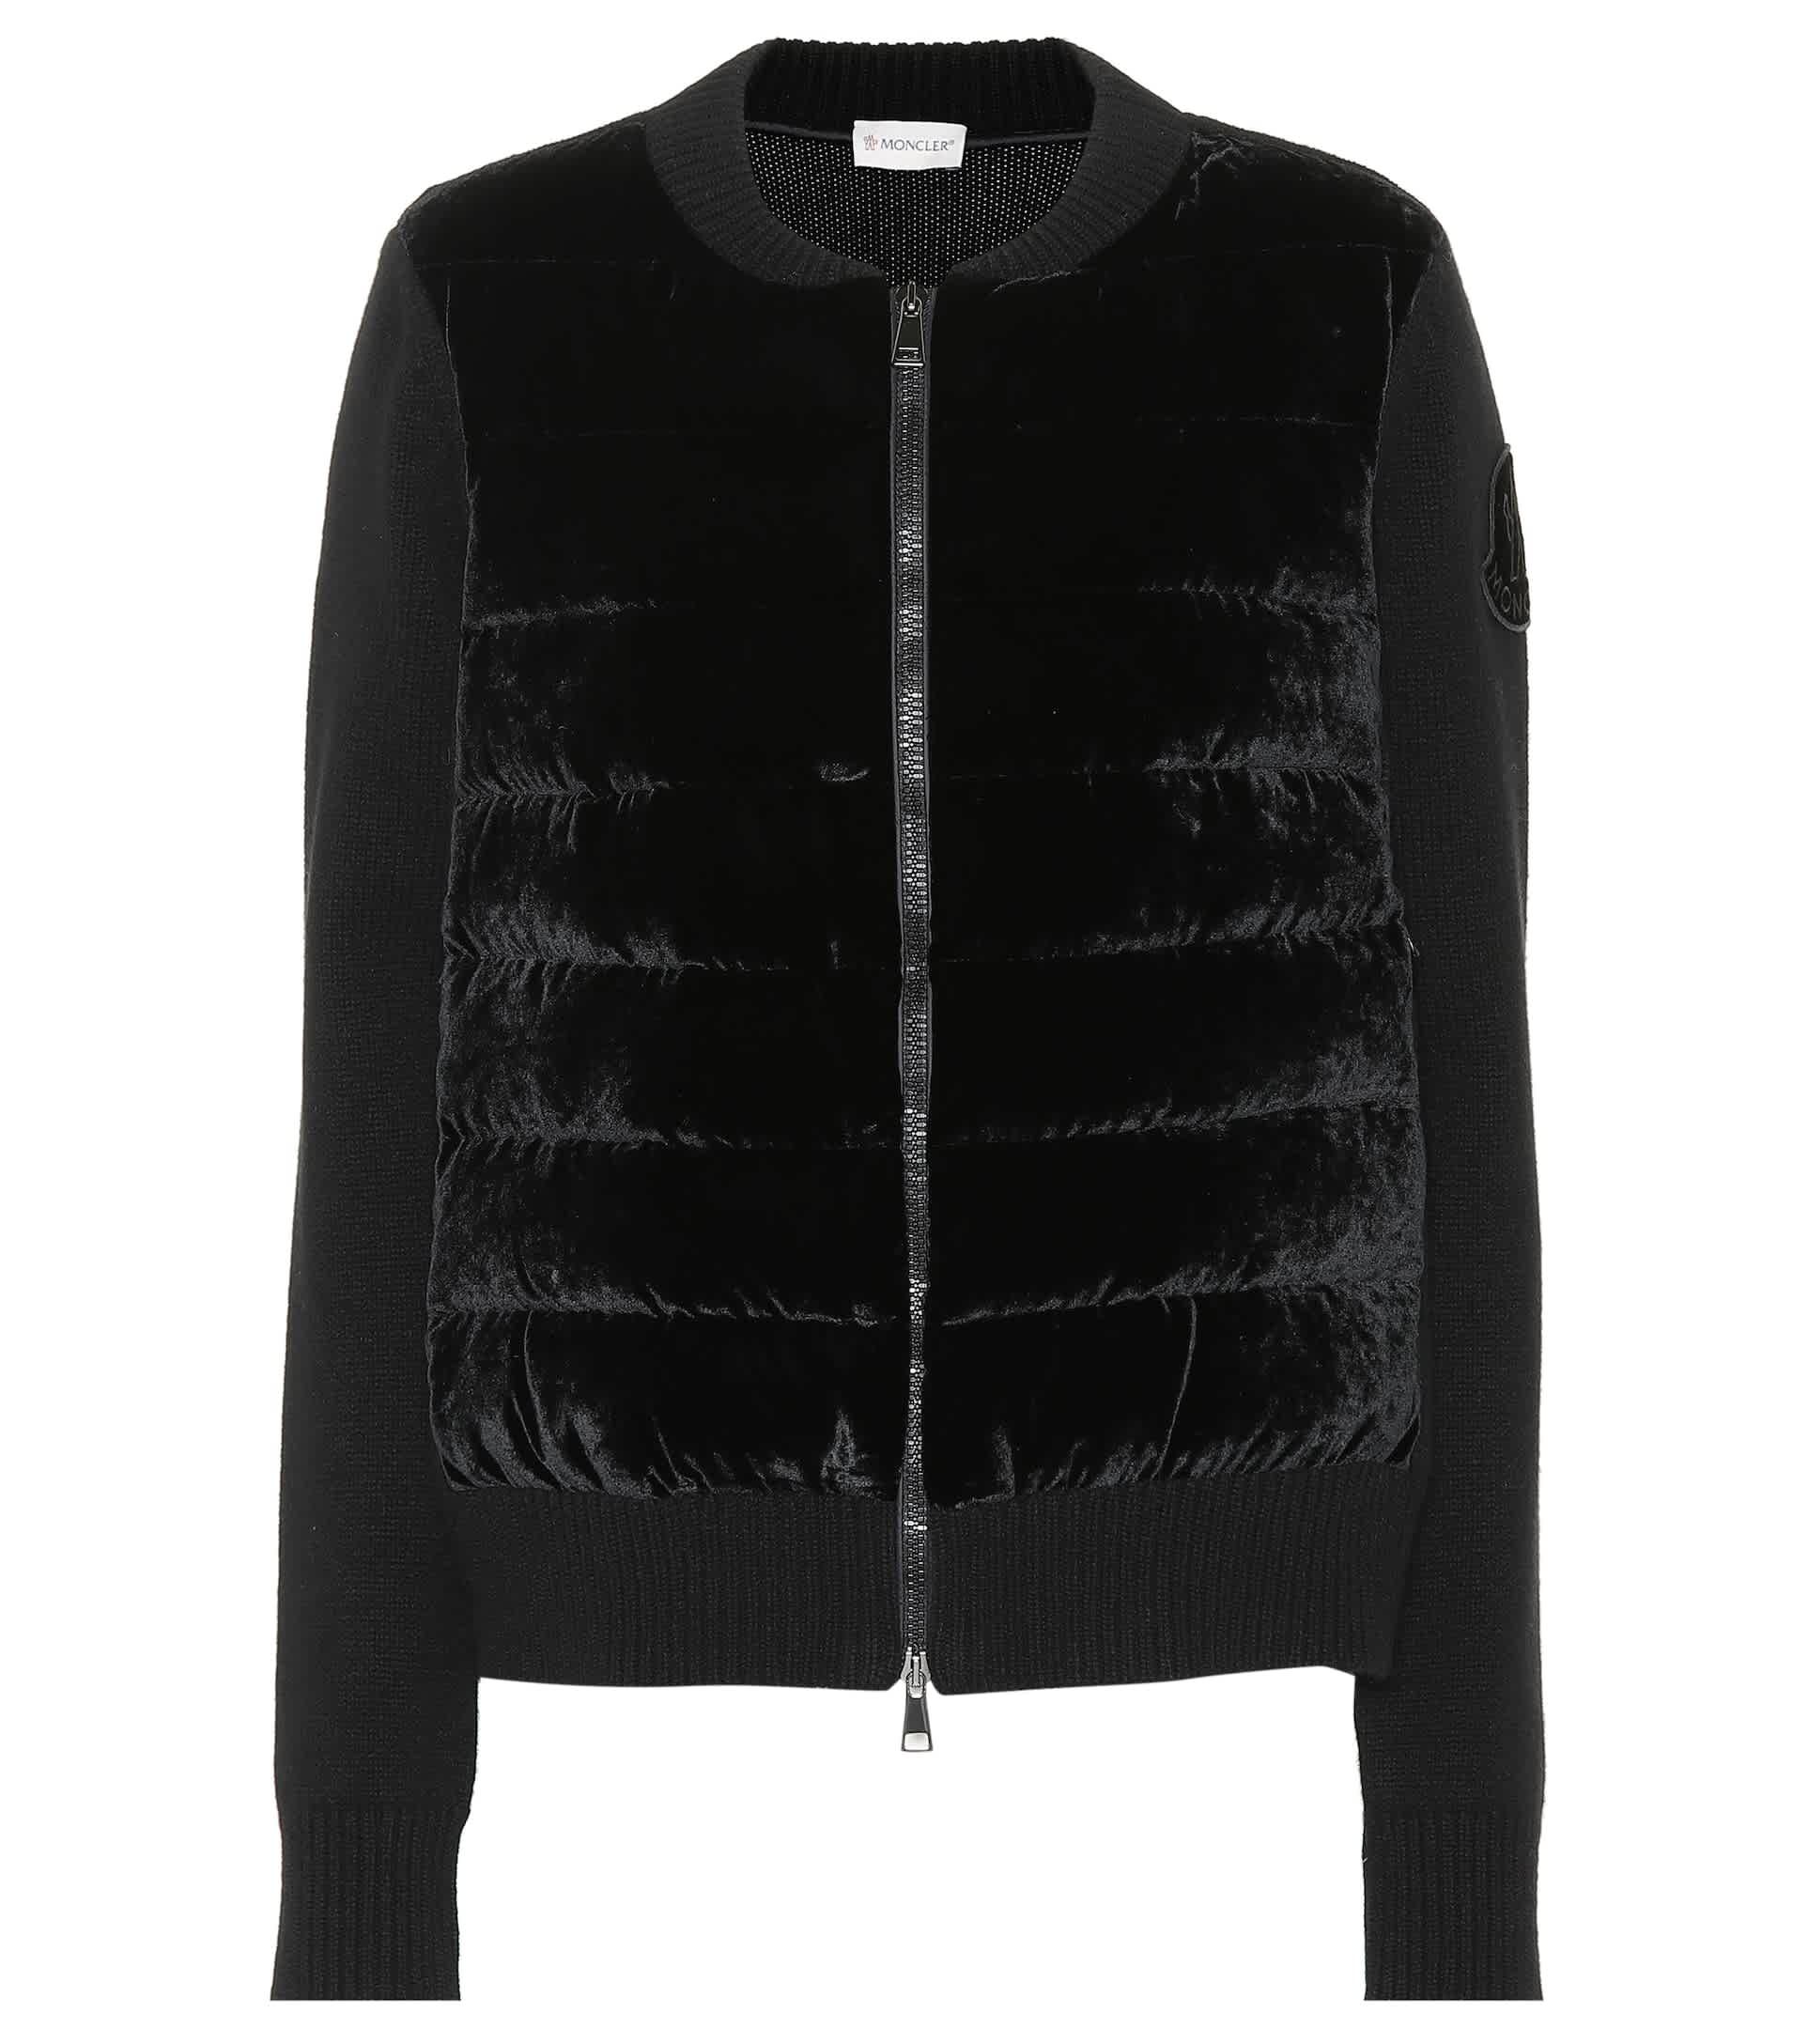 Moncler Wool And Cashmere-blend Jacket in Black - Lyst